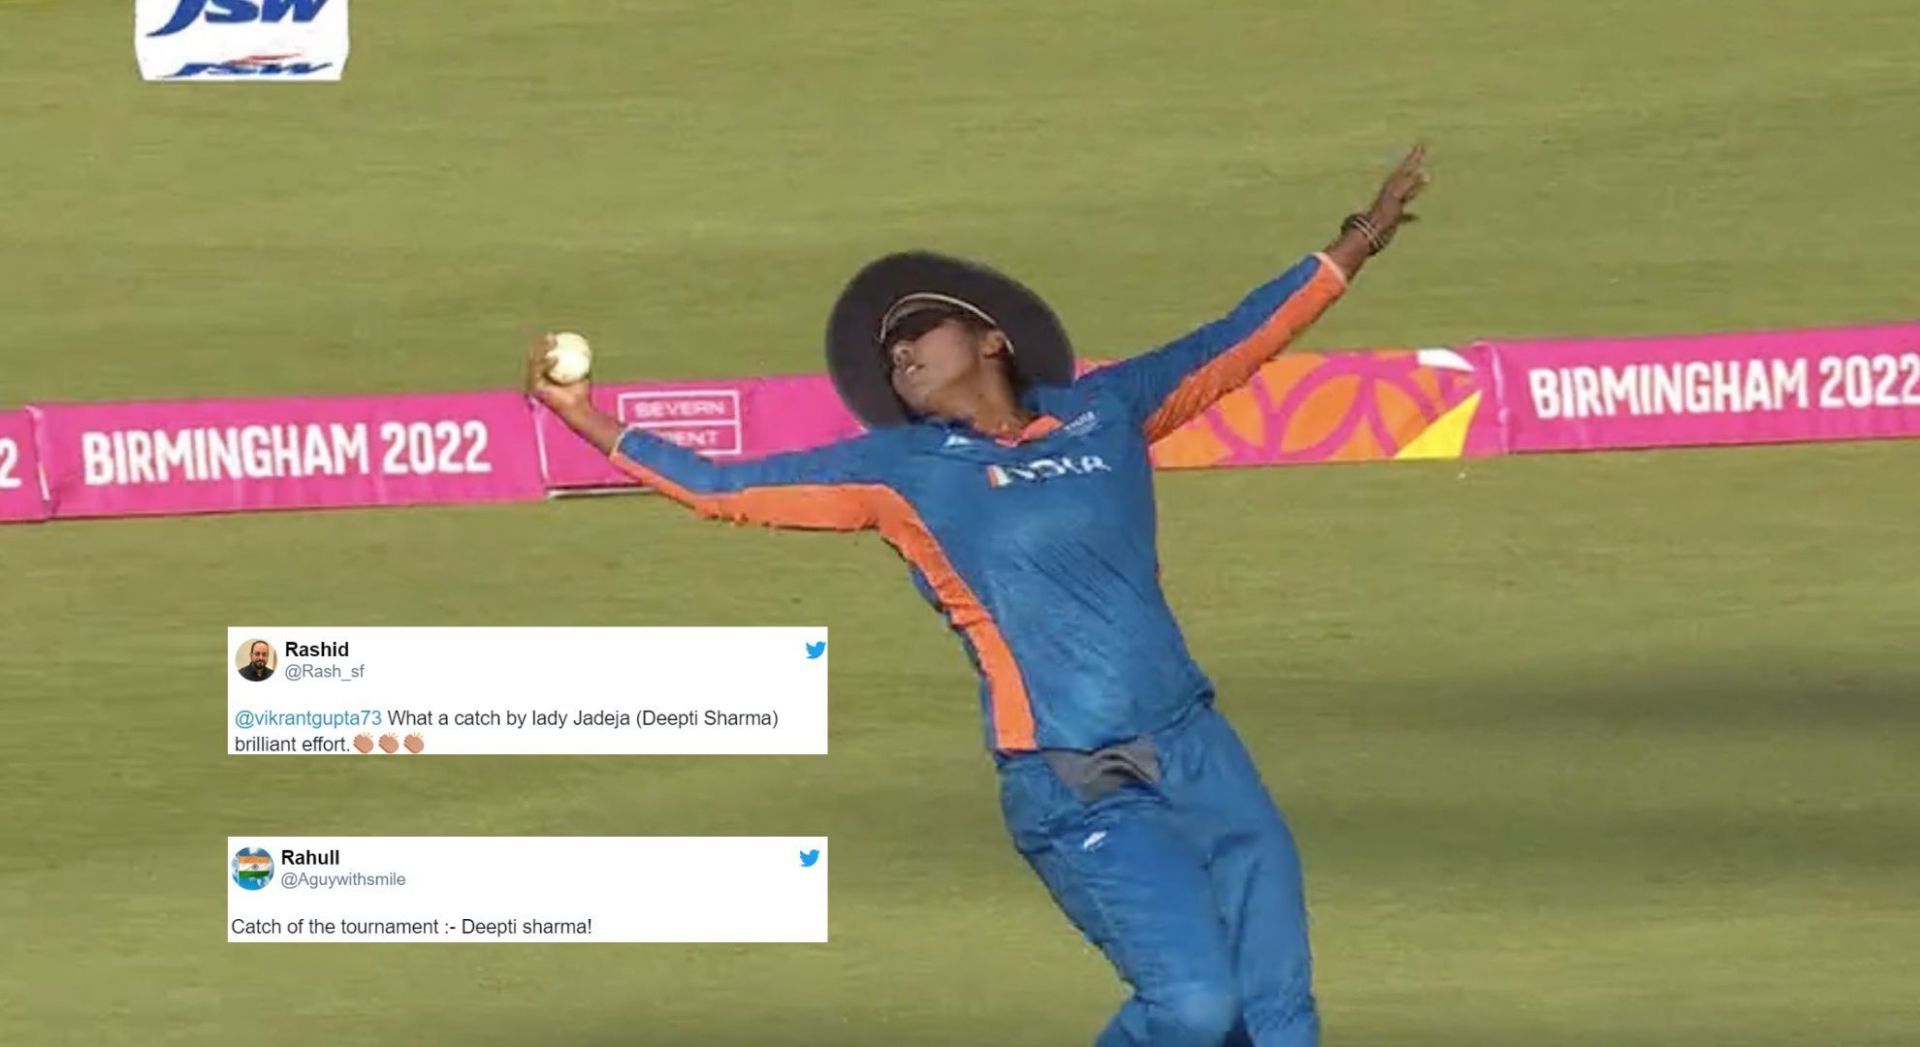 Deepti Sharma dived backwards to take the catch to perfection